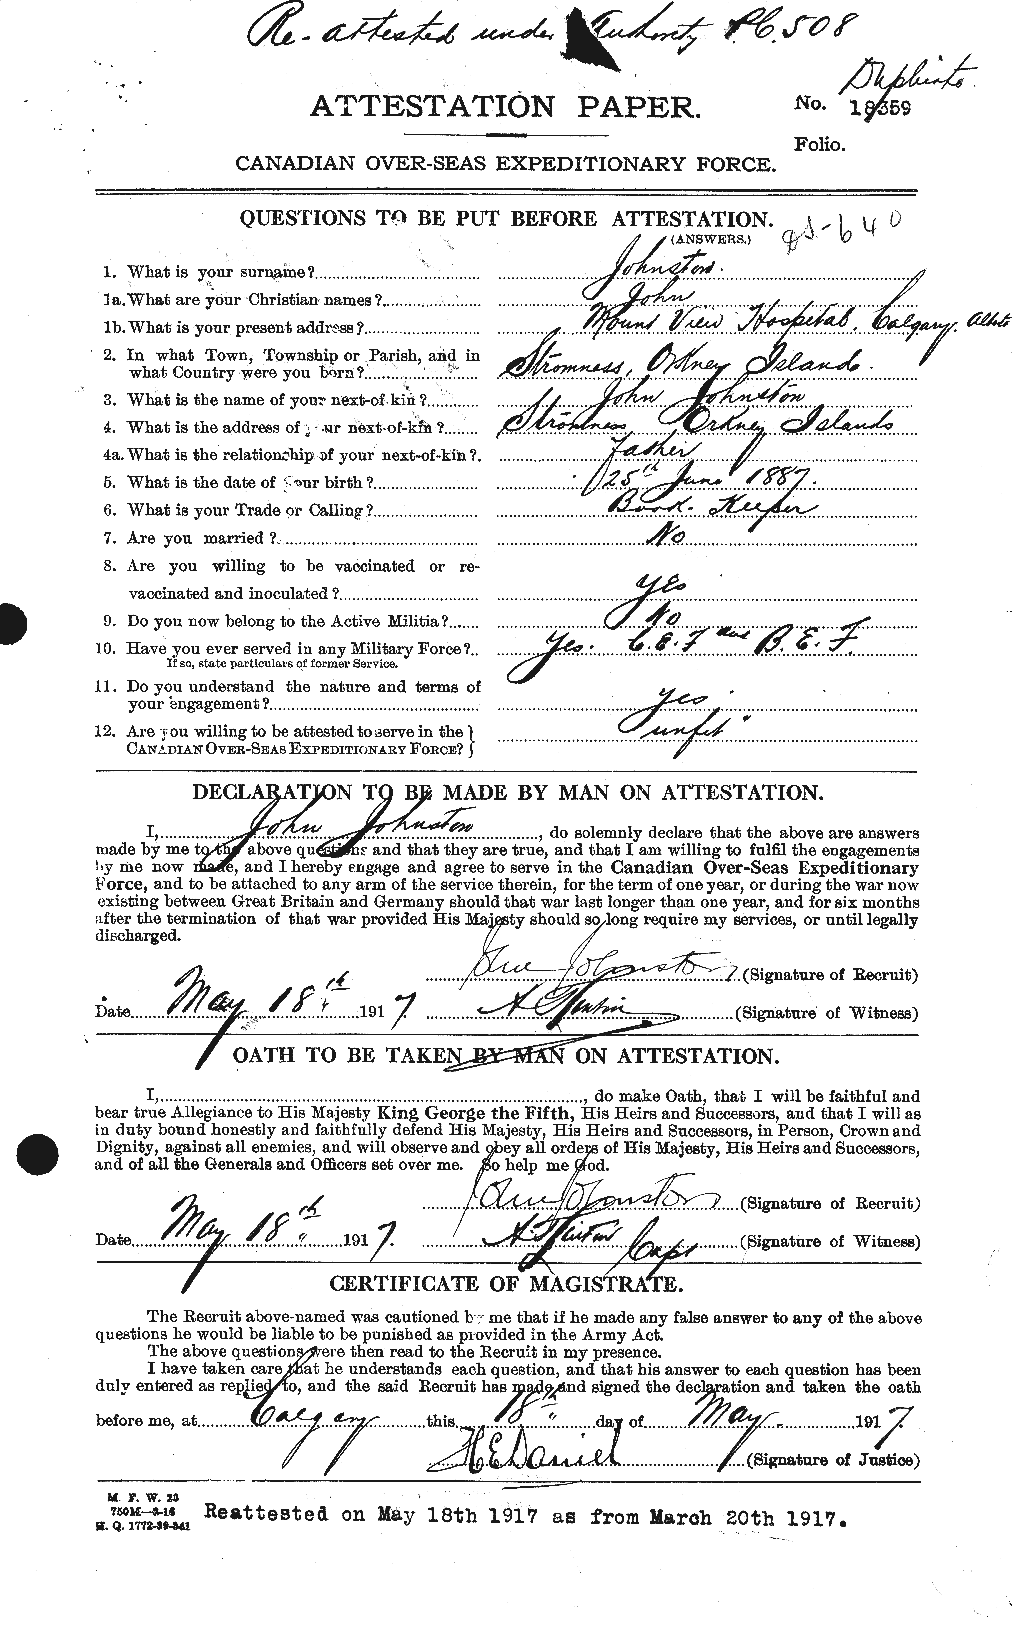 Personnel Records of the First World War - CEF 422796a